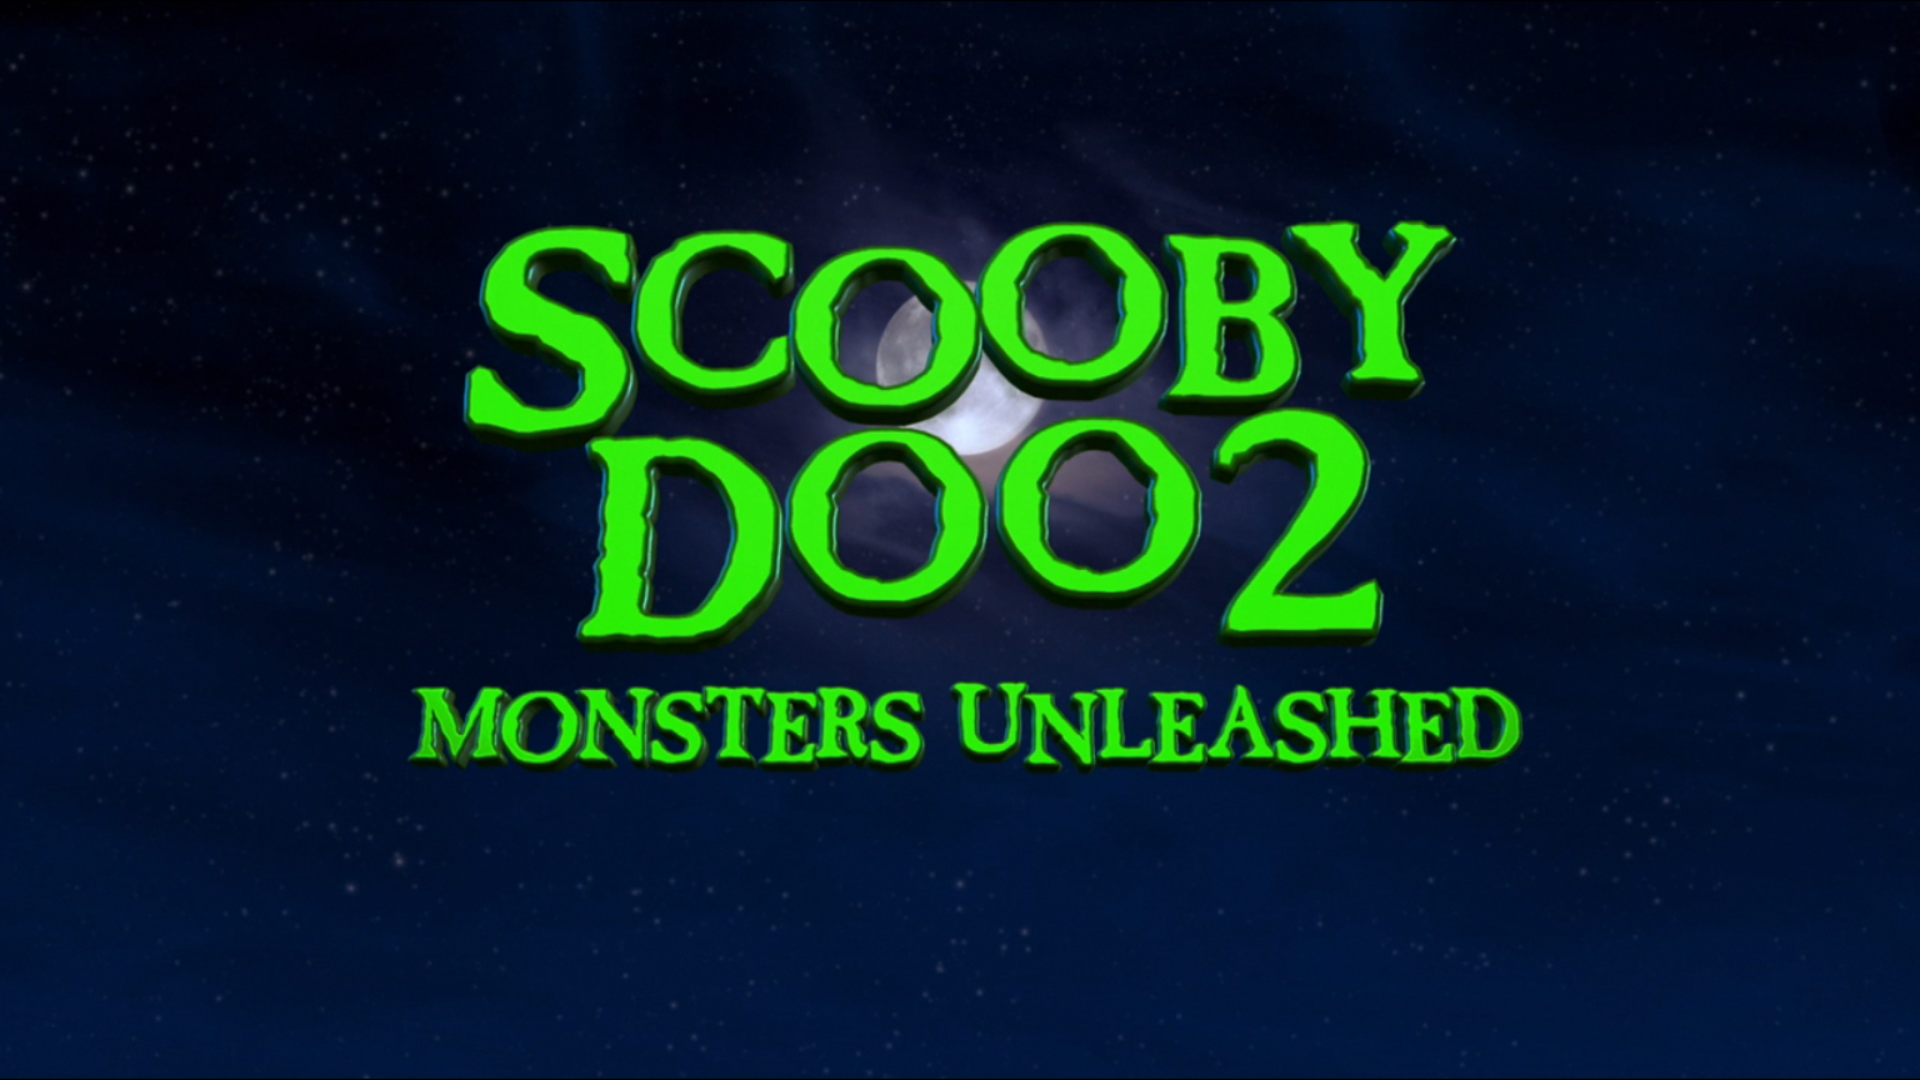 watch scooby doo 2 monsters unleashed full movie